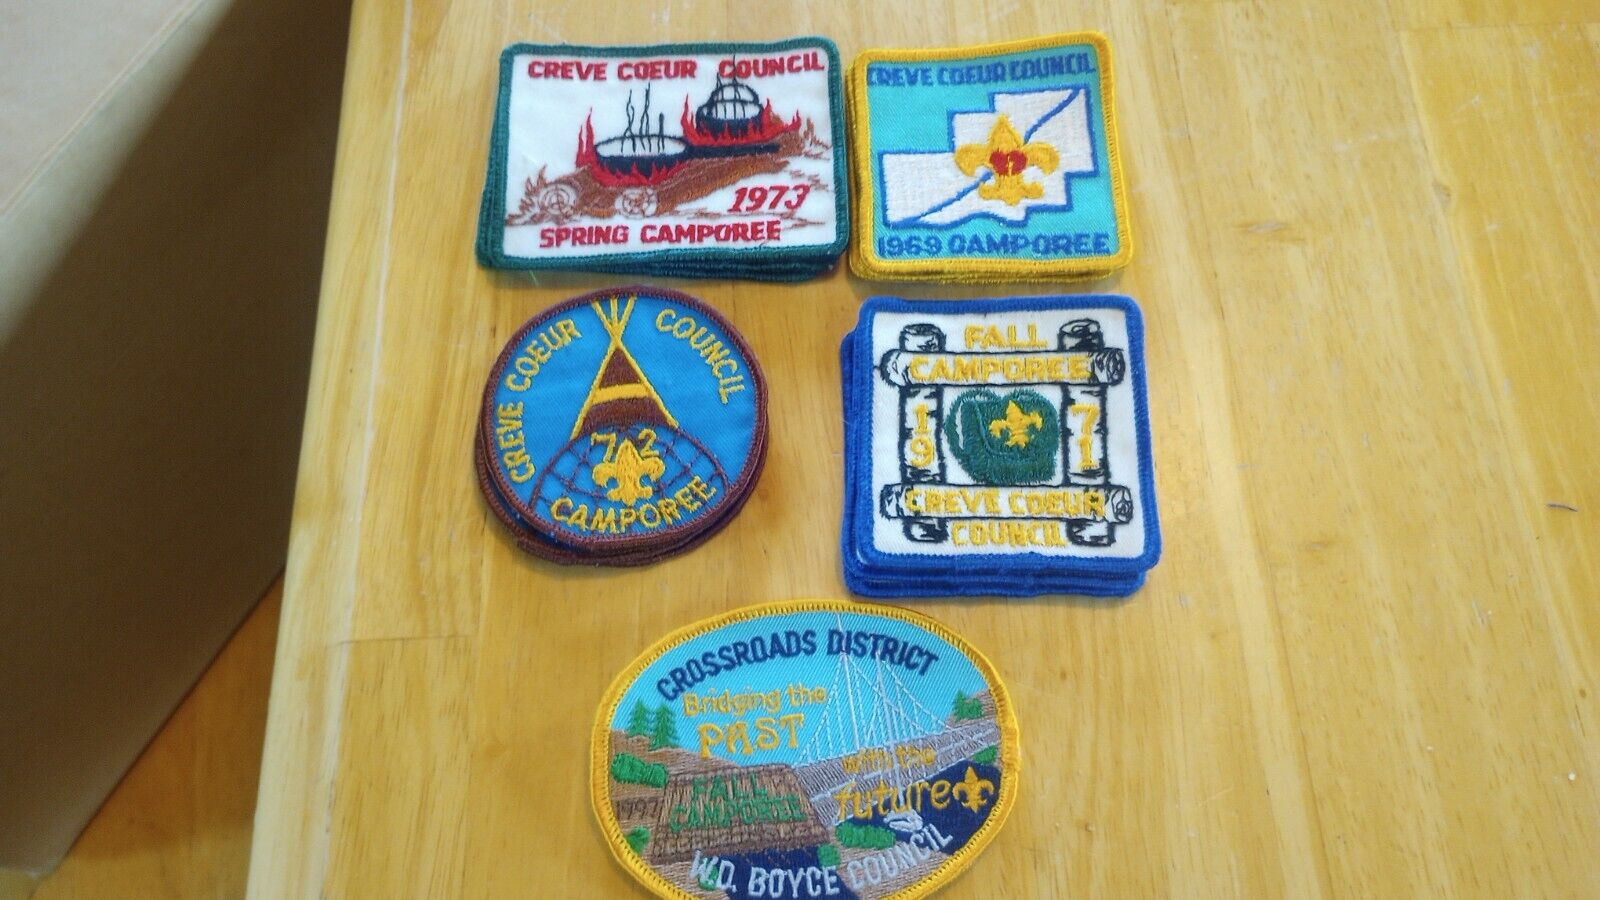 Creve Coeur Council Patches-5 different patches included